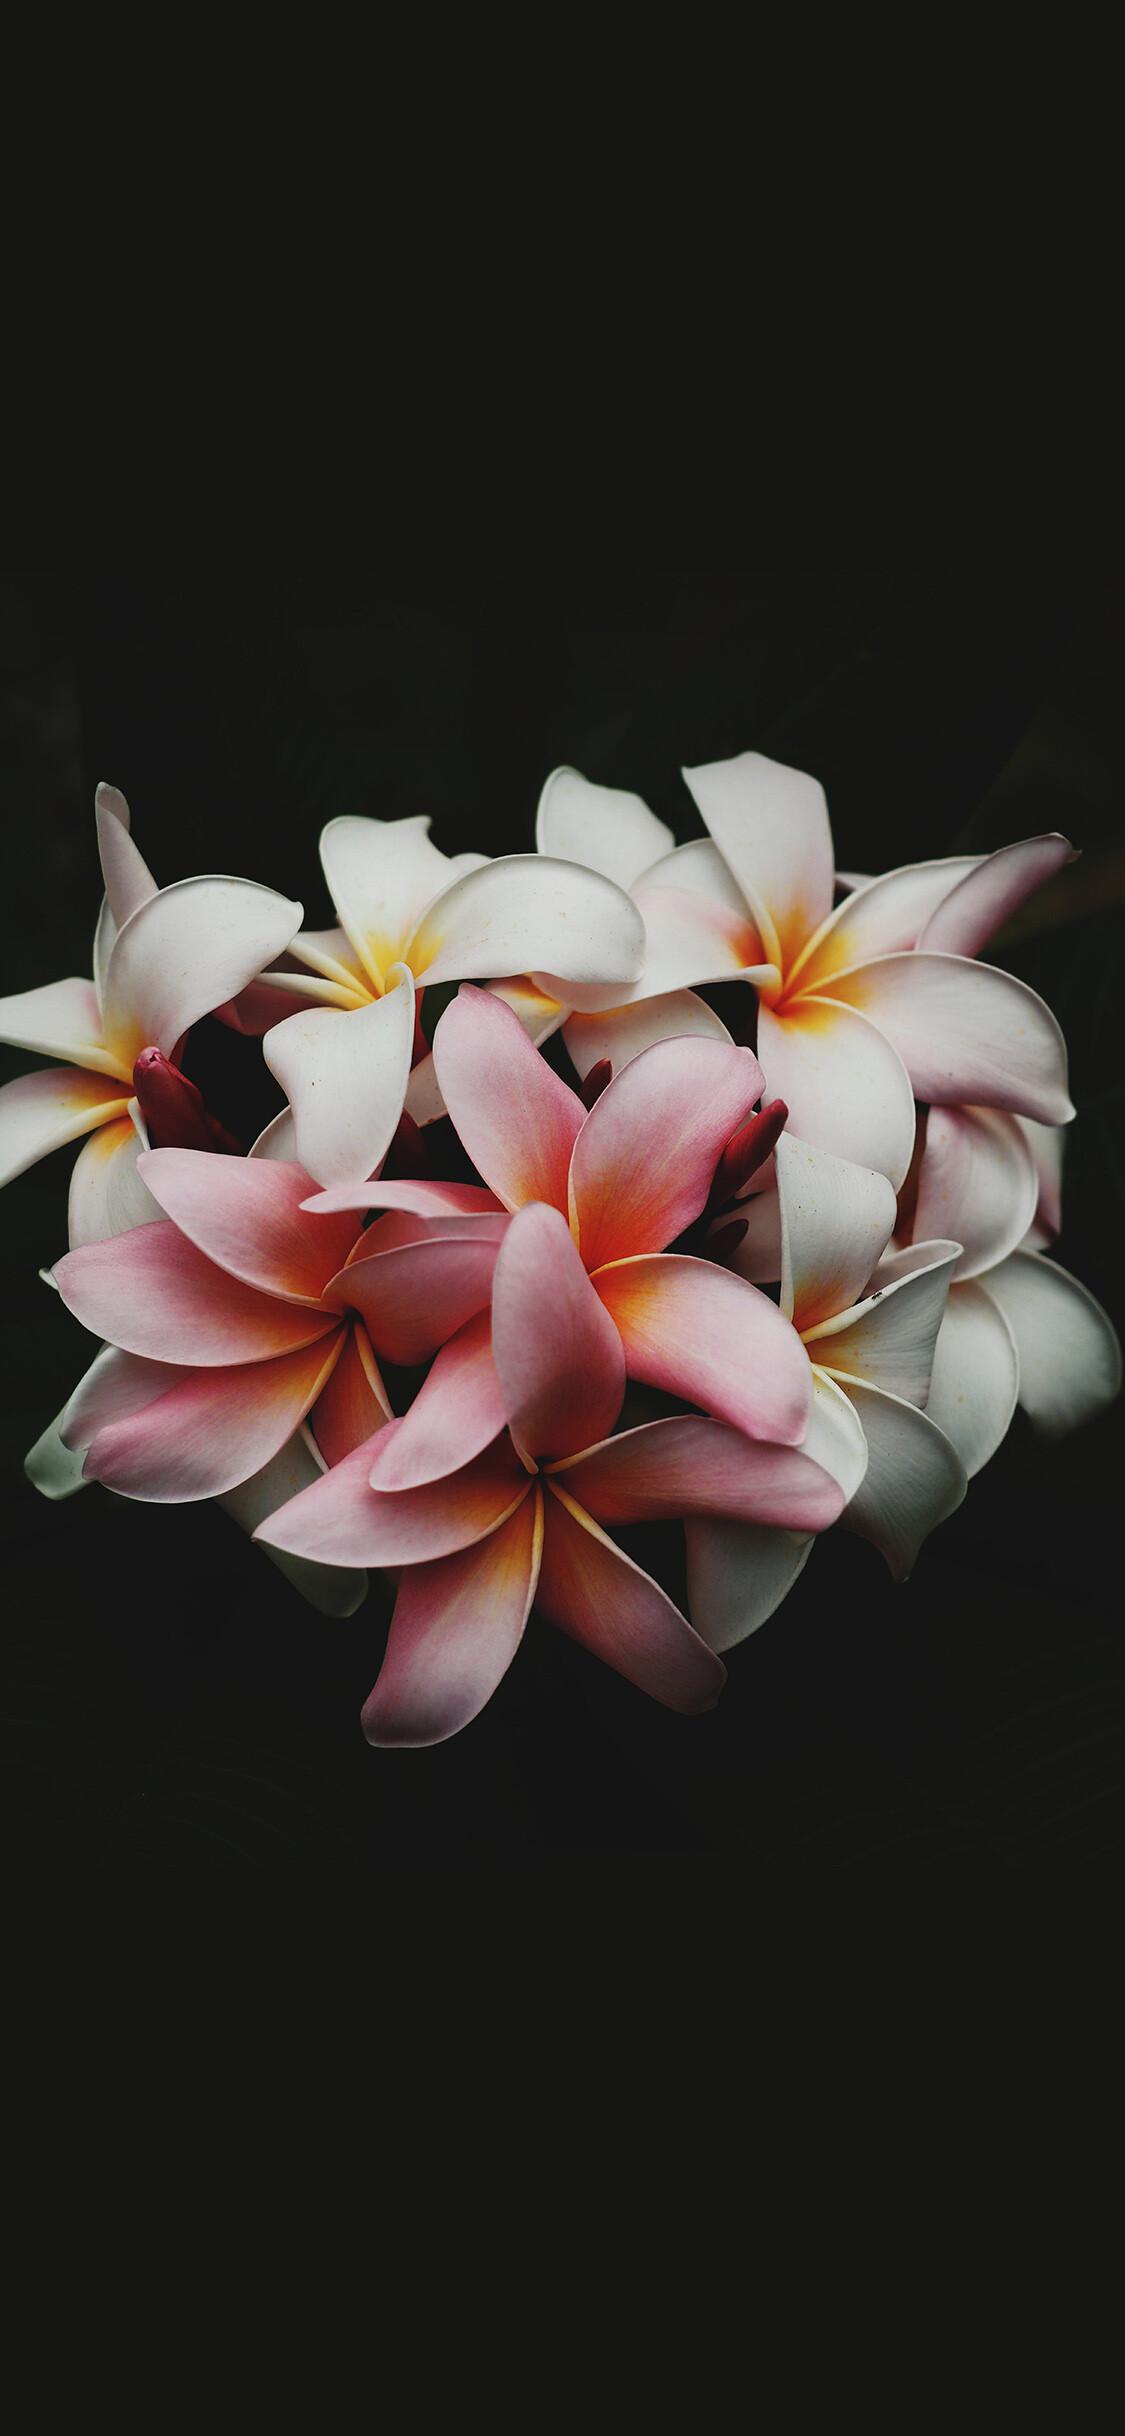 Frangipani Flower: Plumeria are divided into evergreen and deciduous species and there are up to 20 species in the genus. 1130x2440 HD Background.